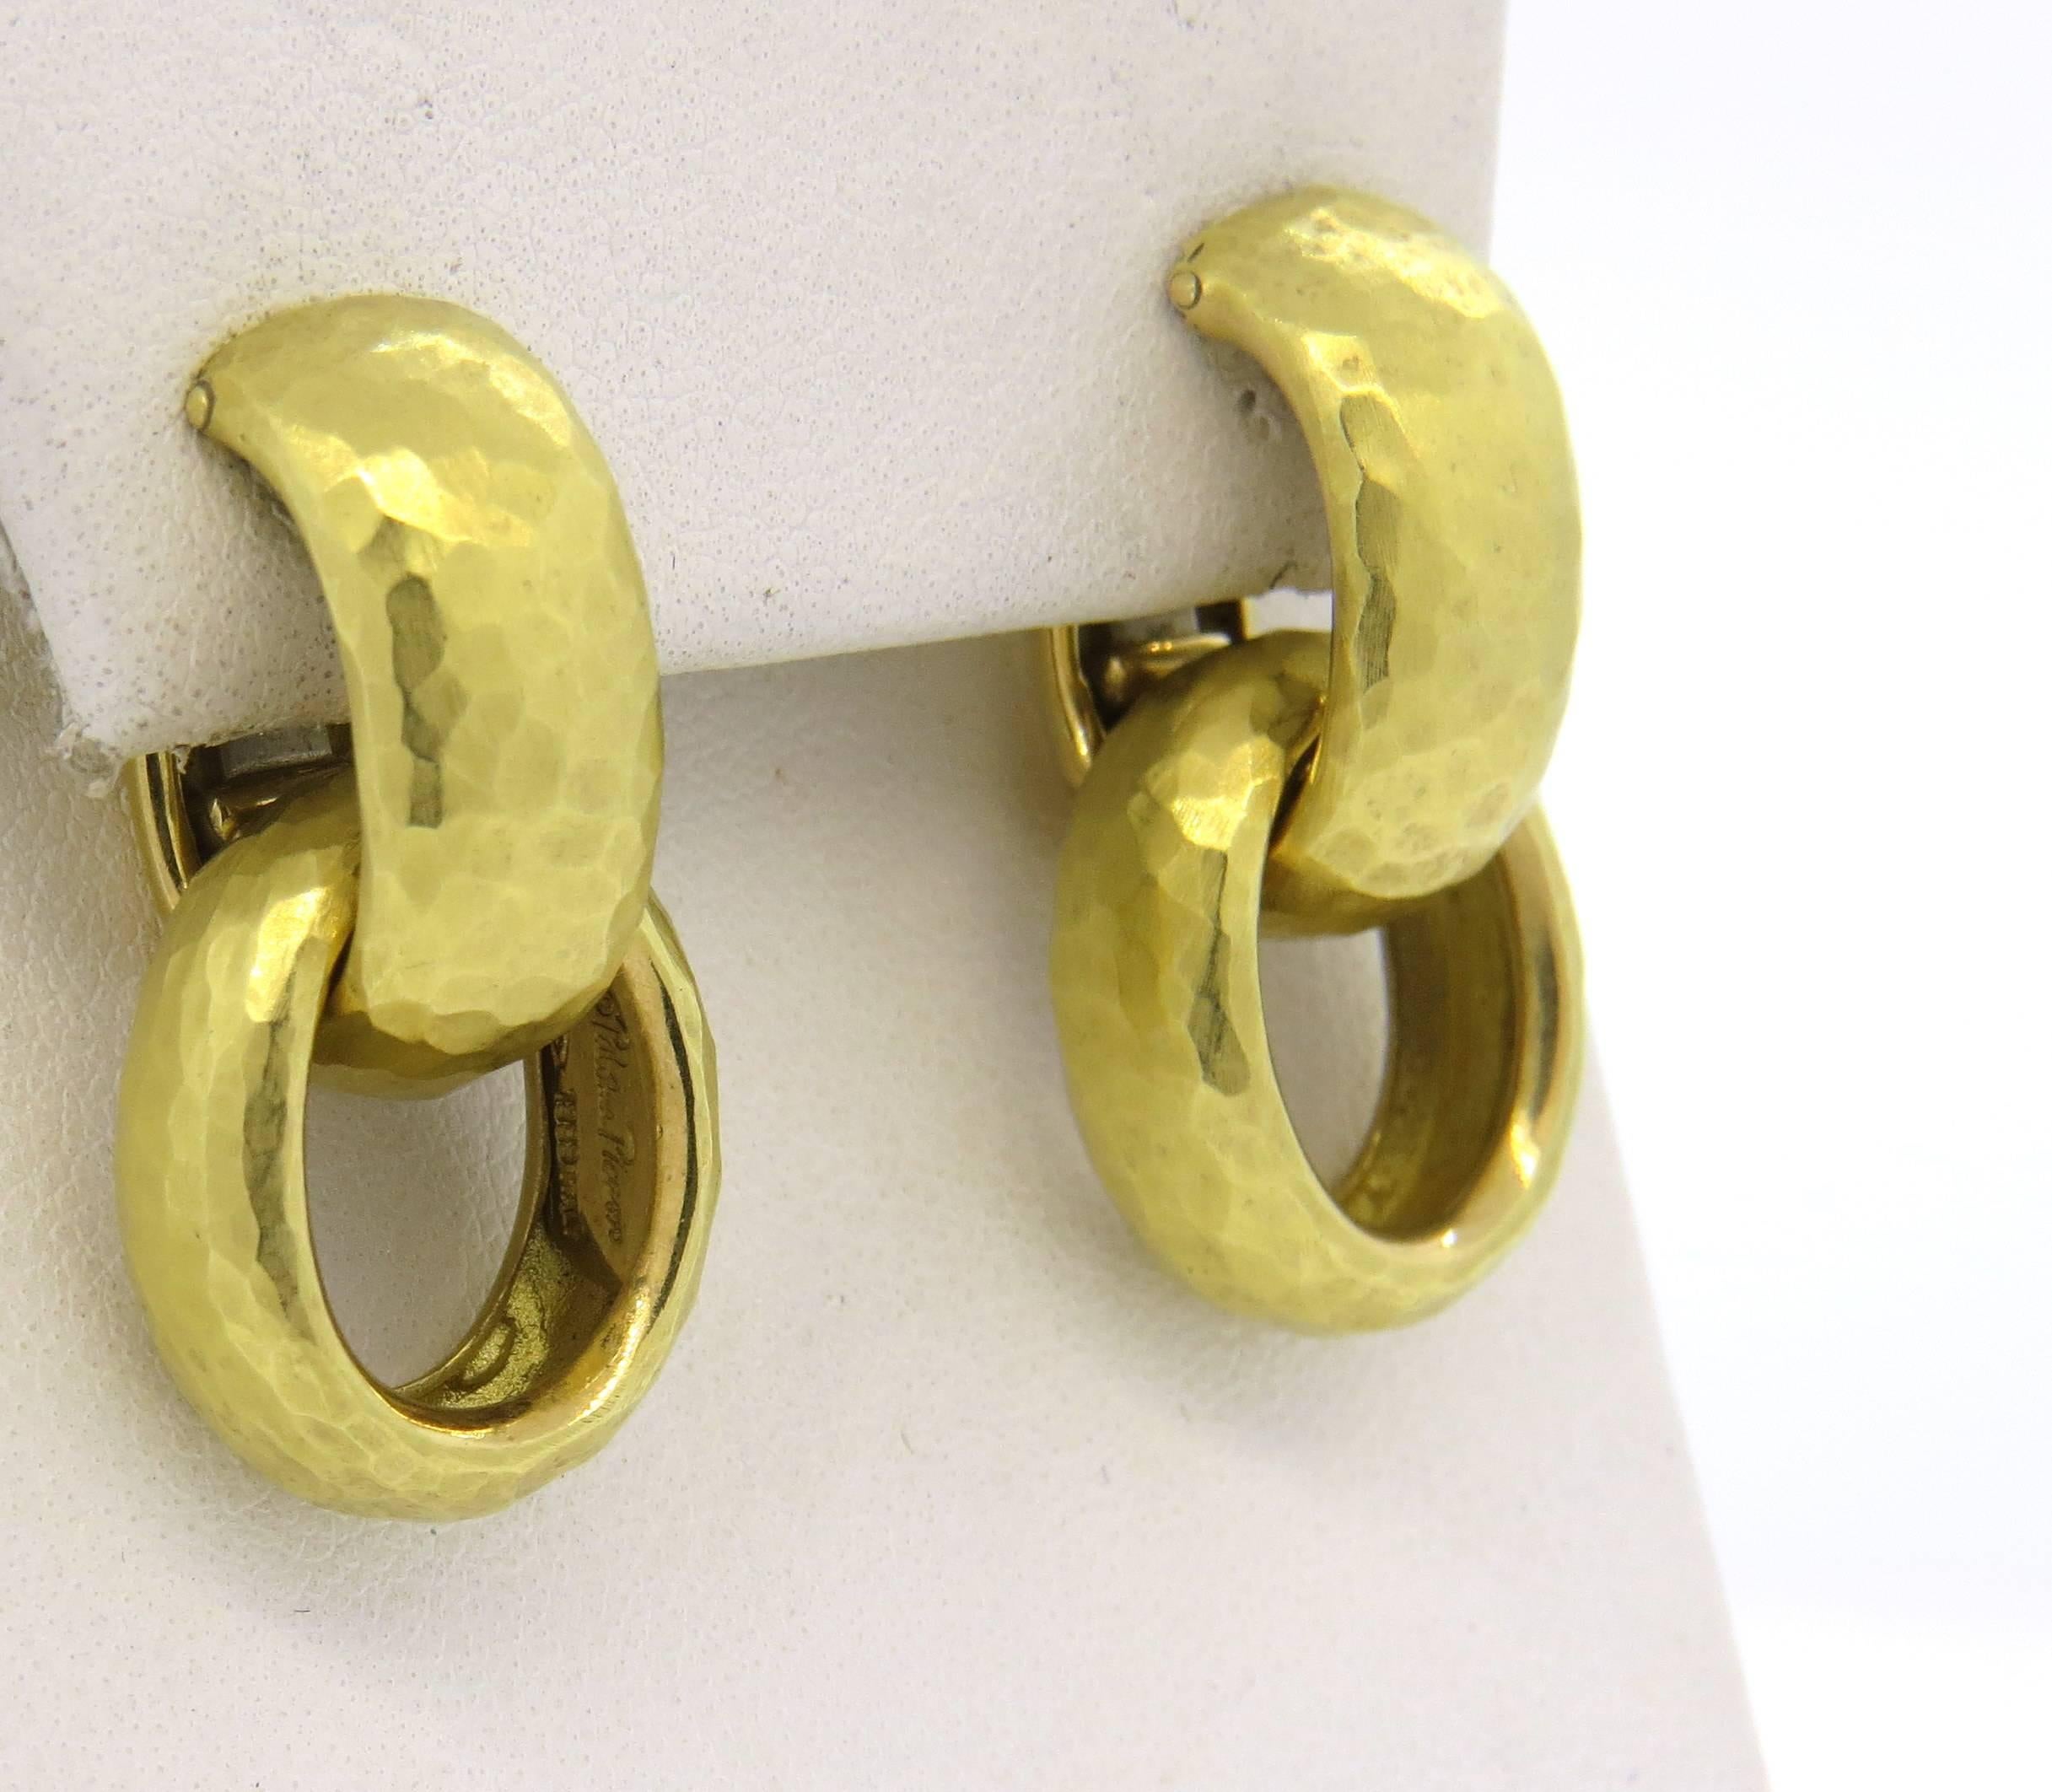 hammered gold earrings